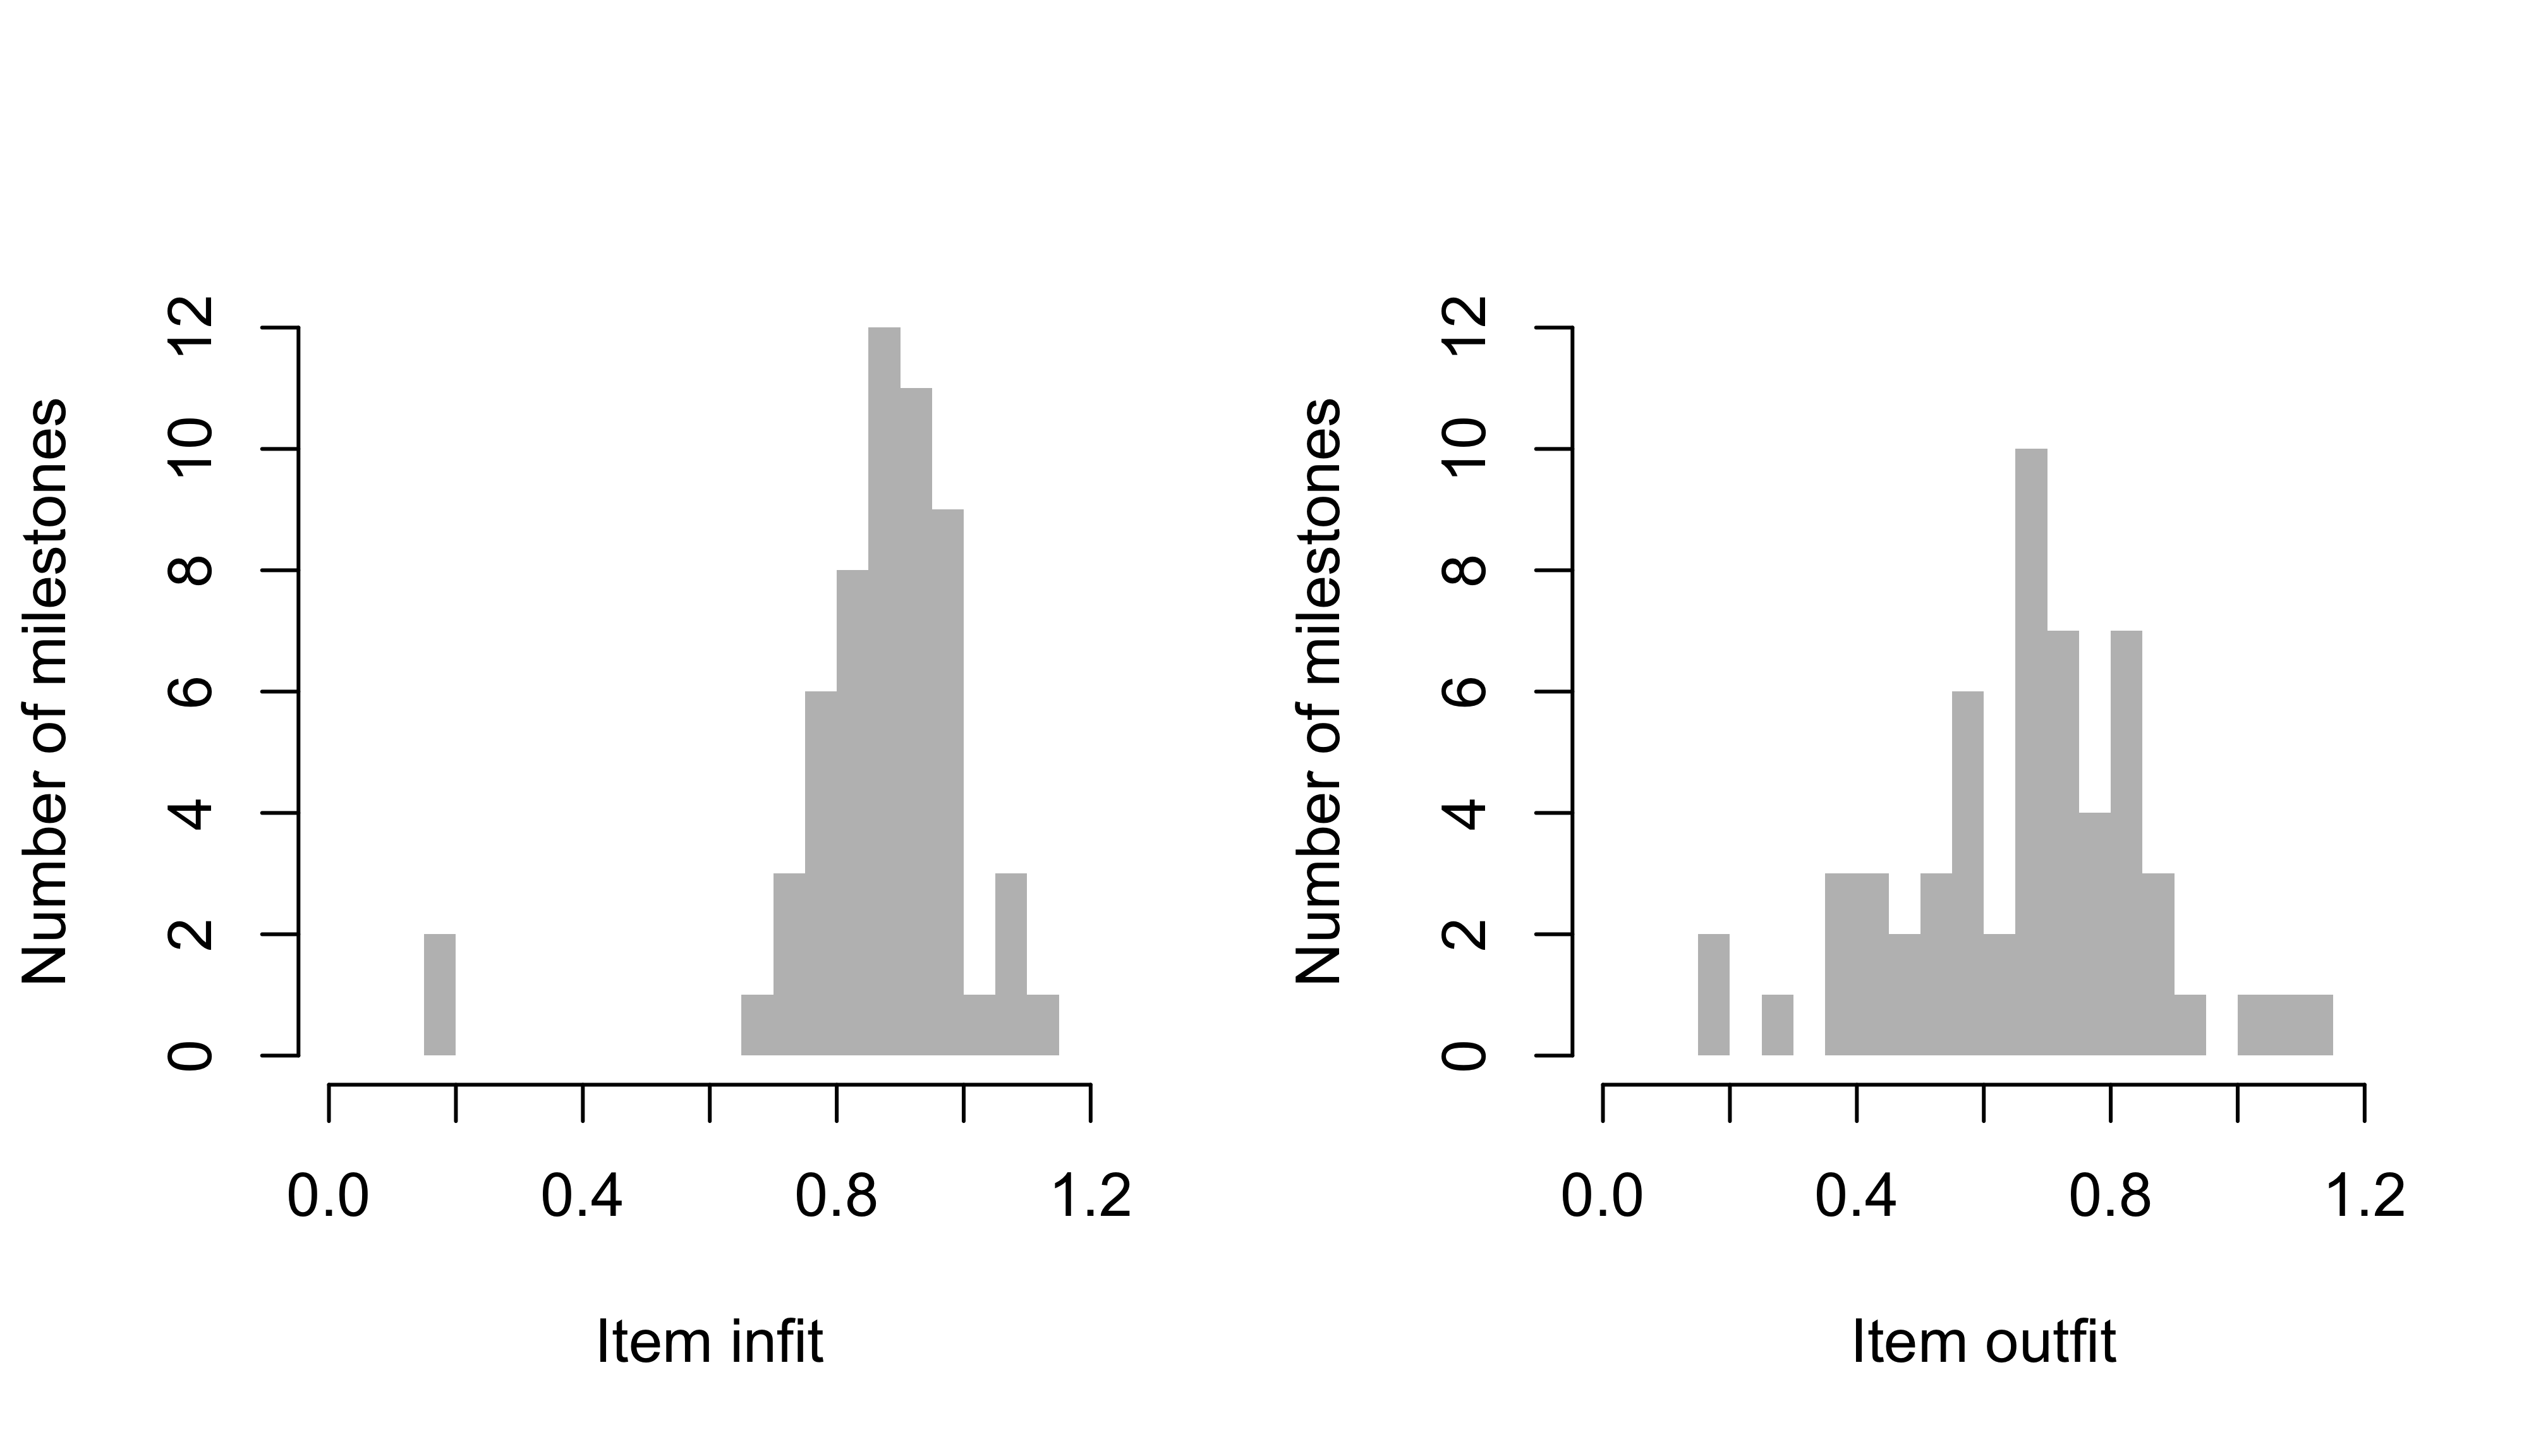 Frequency distribution of infit (left) and outfit (right) of 57 milestones from the DDI (SMOCC data).